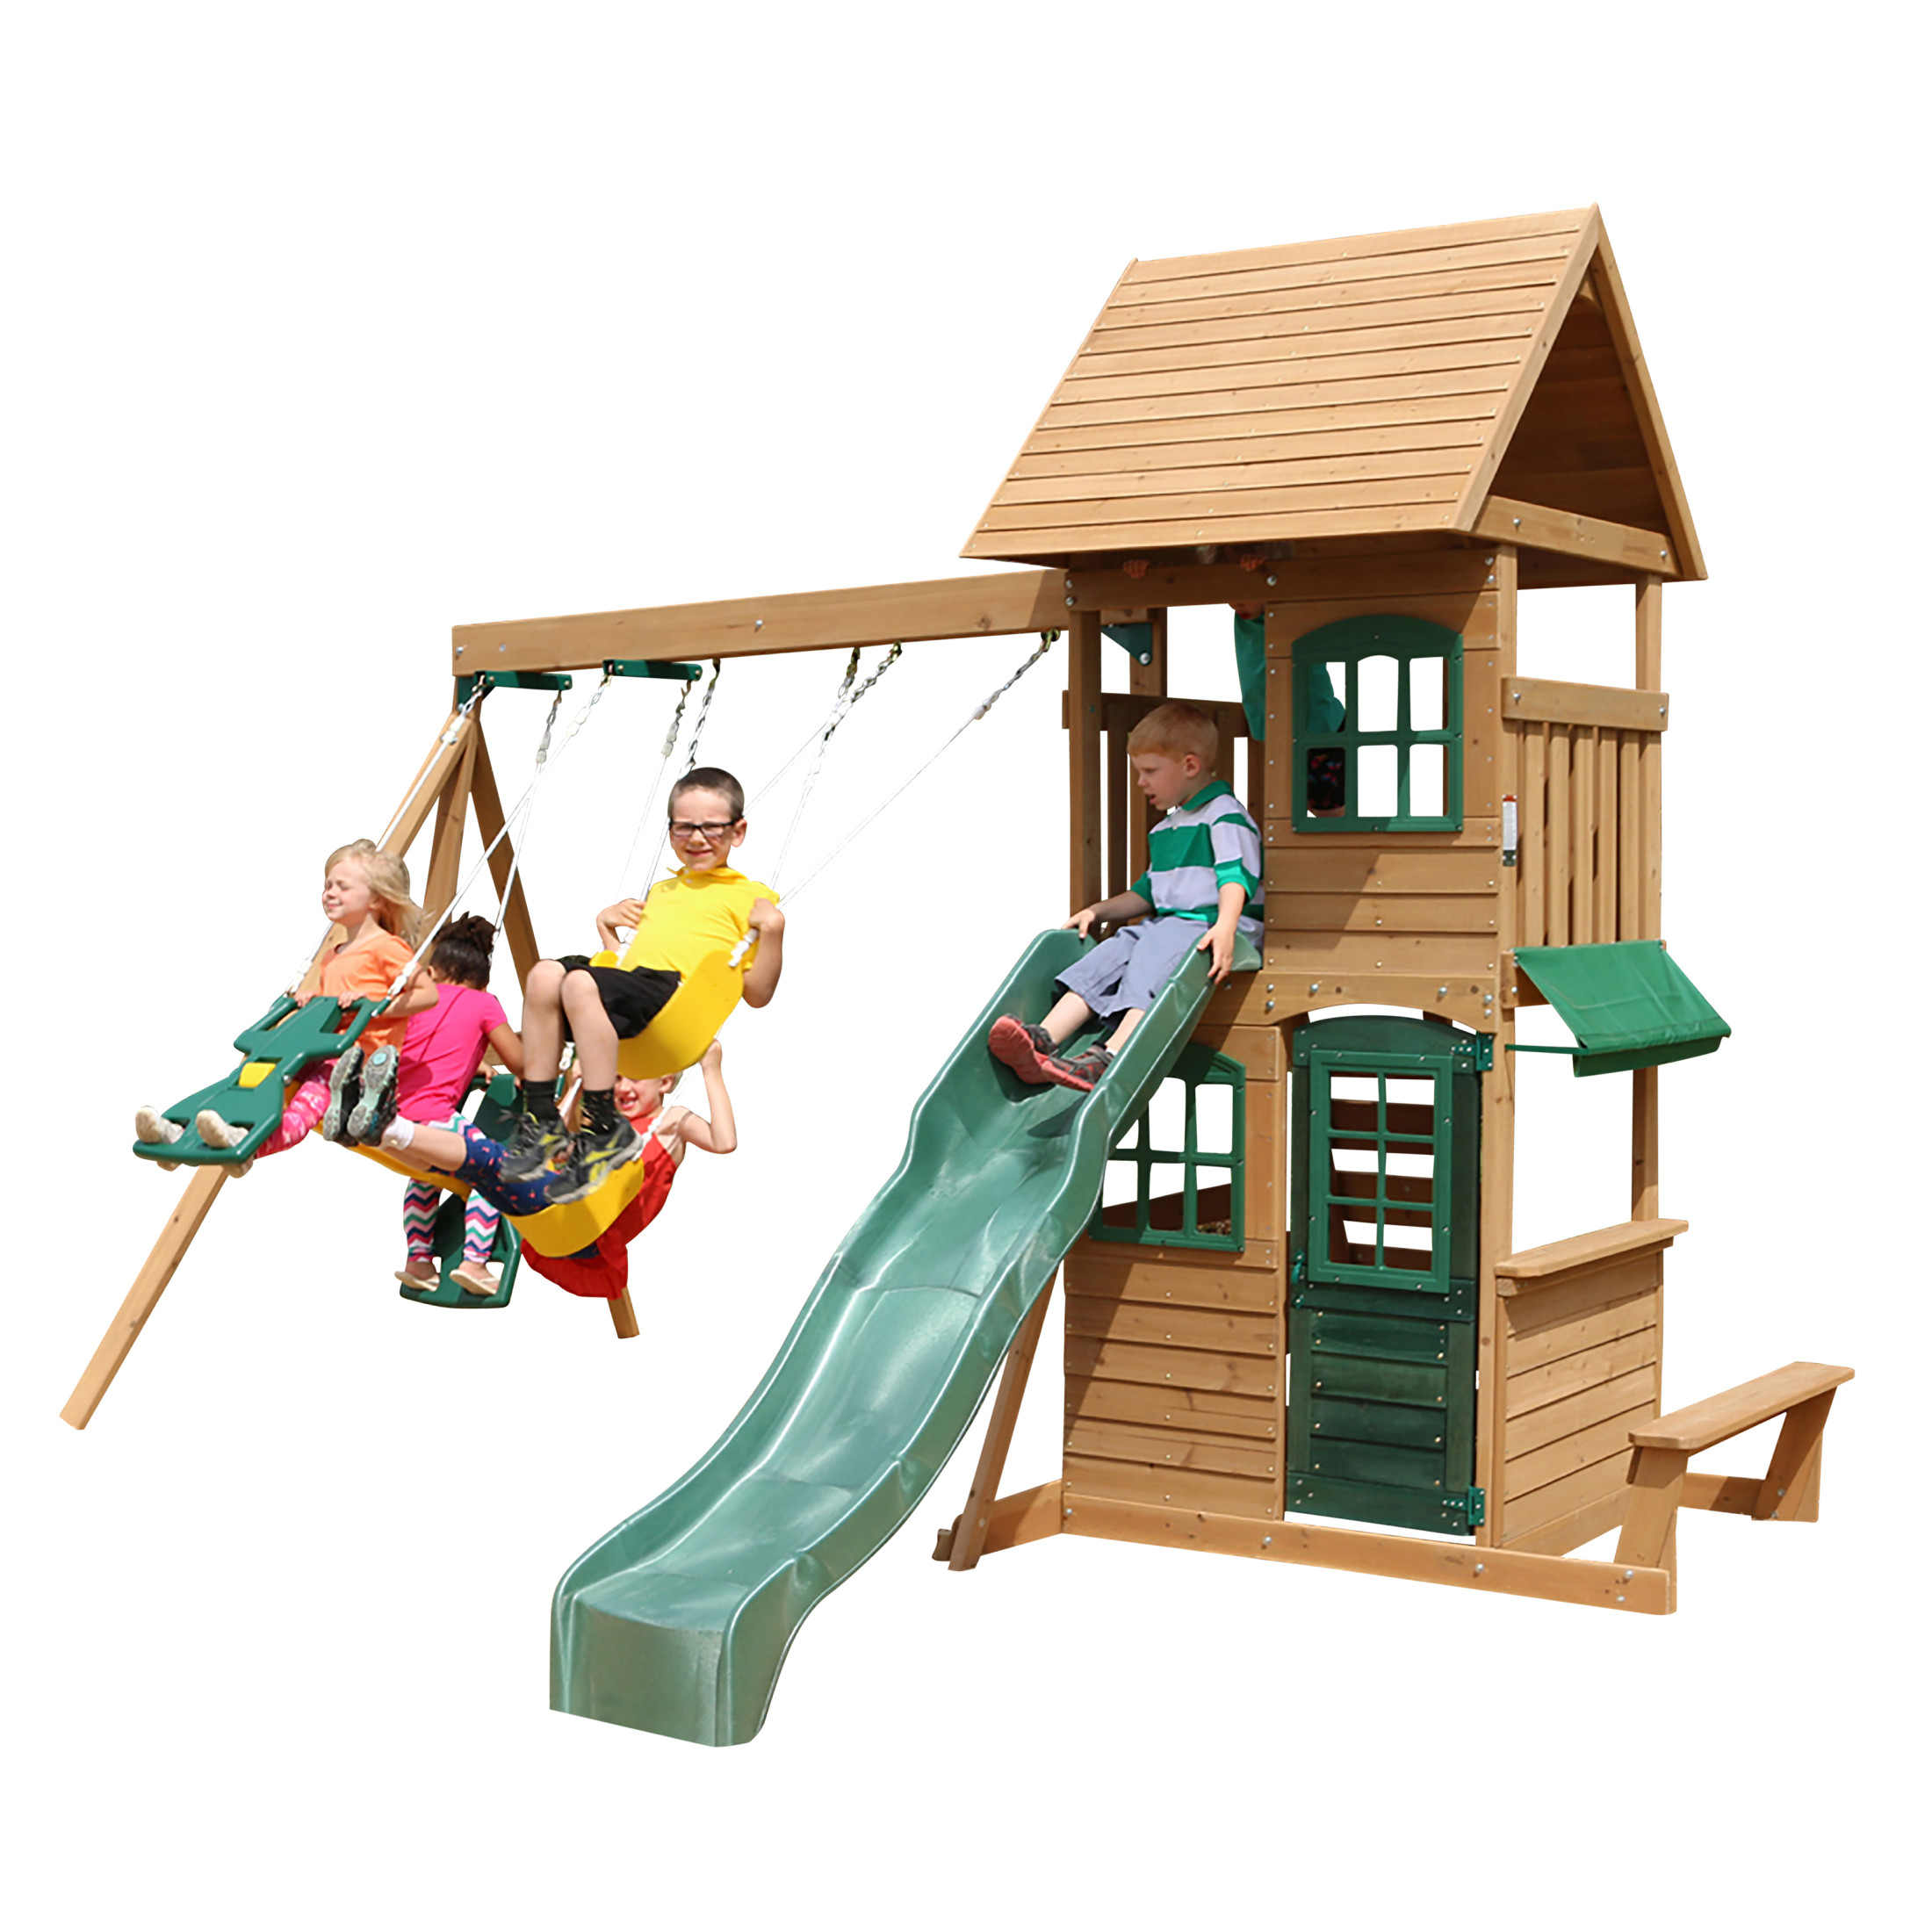 KidKraft Windale Wooden Swing Set / Playset with Clubhouse, Swings, Slide, Shaded Table and Bench - image 2 of 12